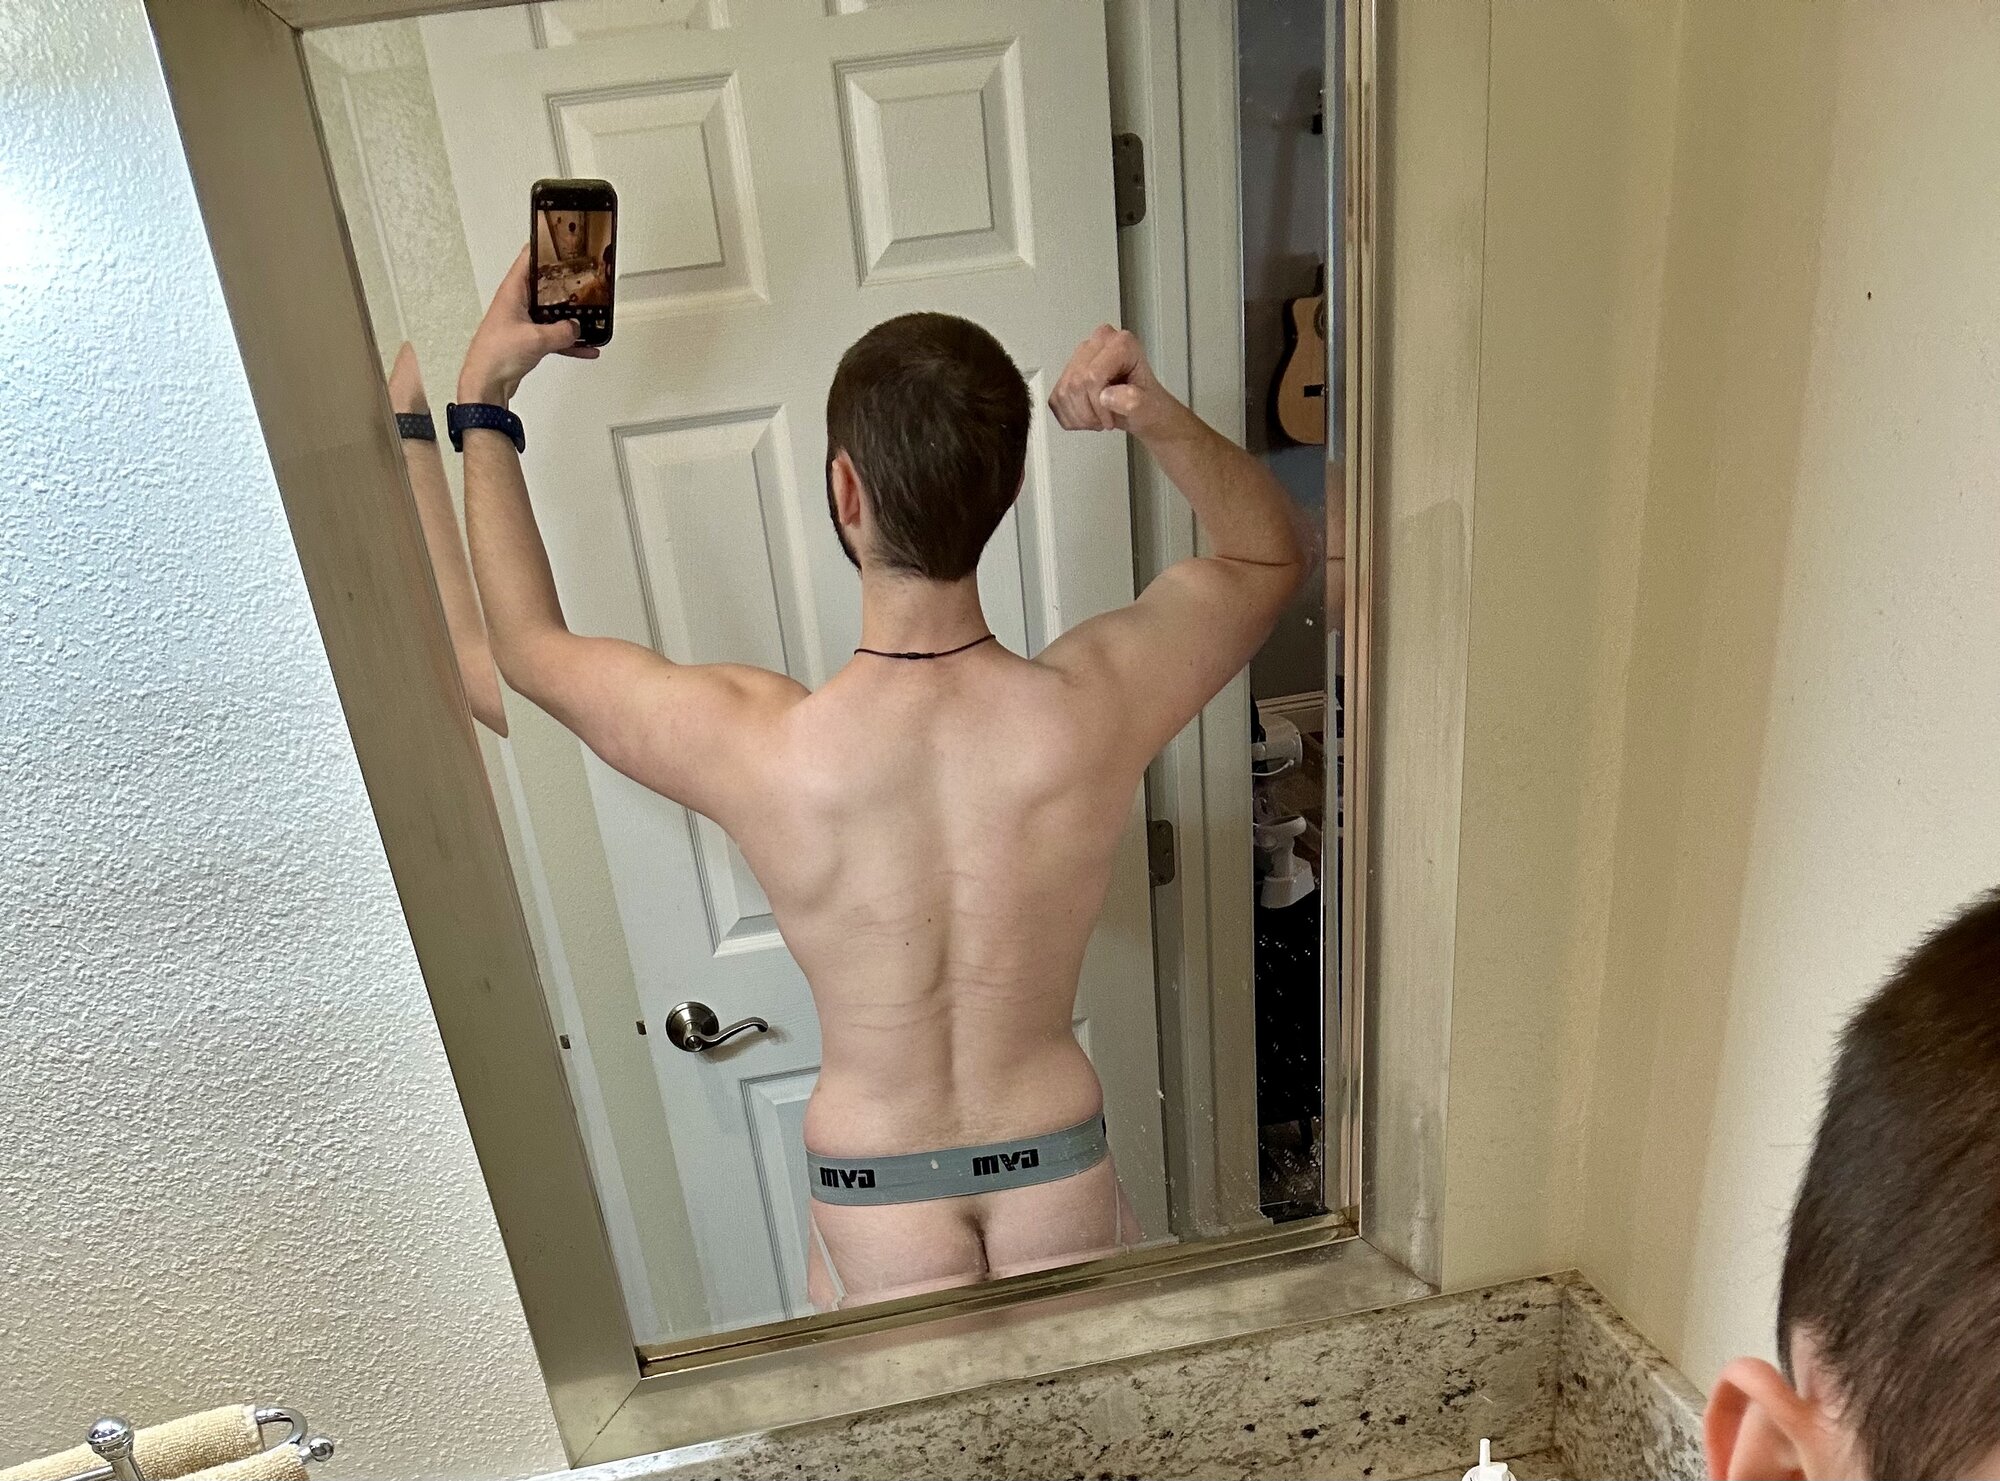 Gym jock from the back